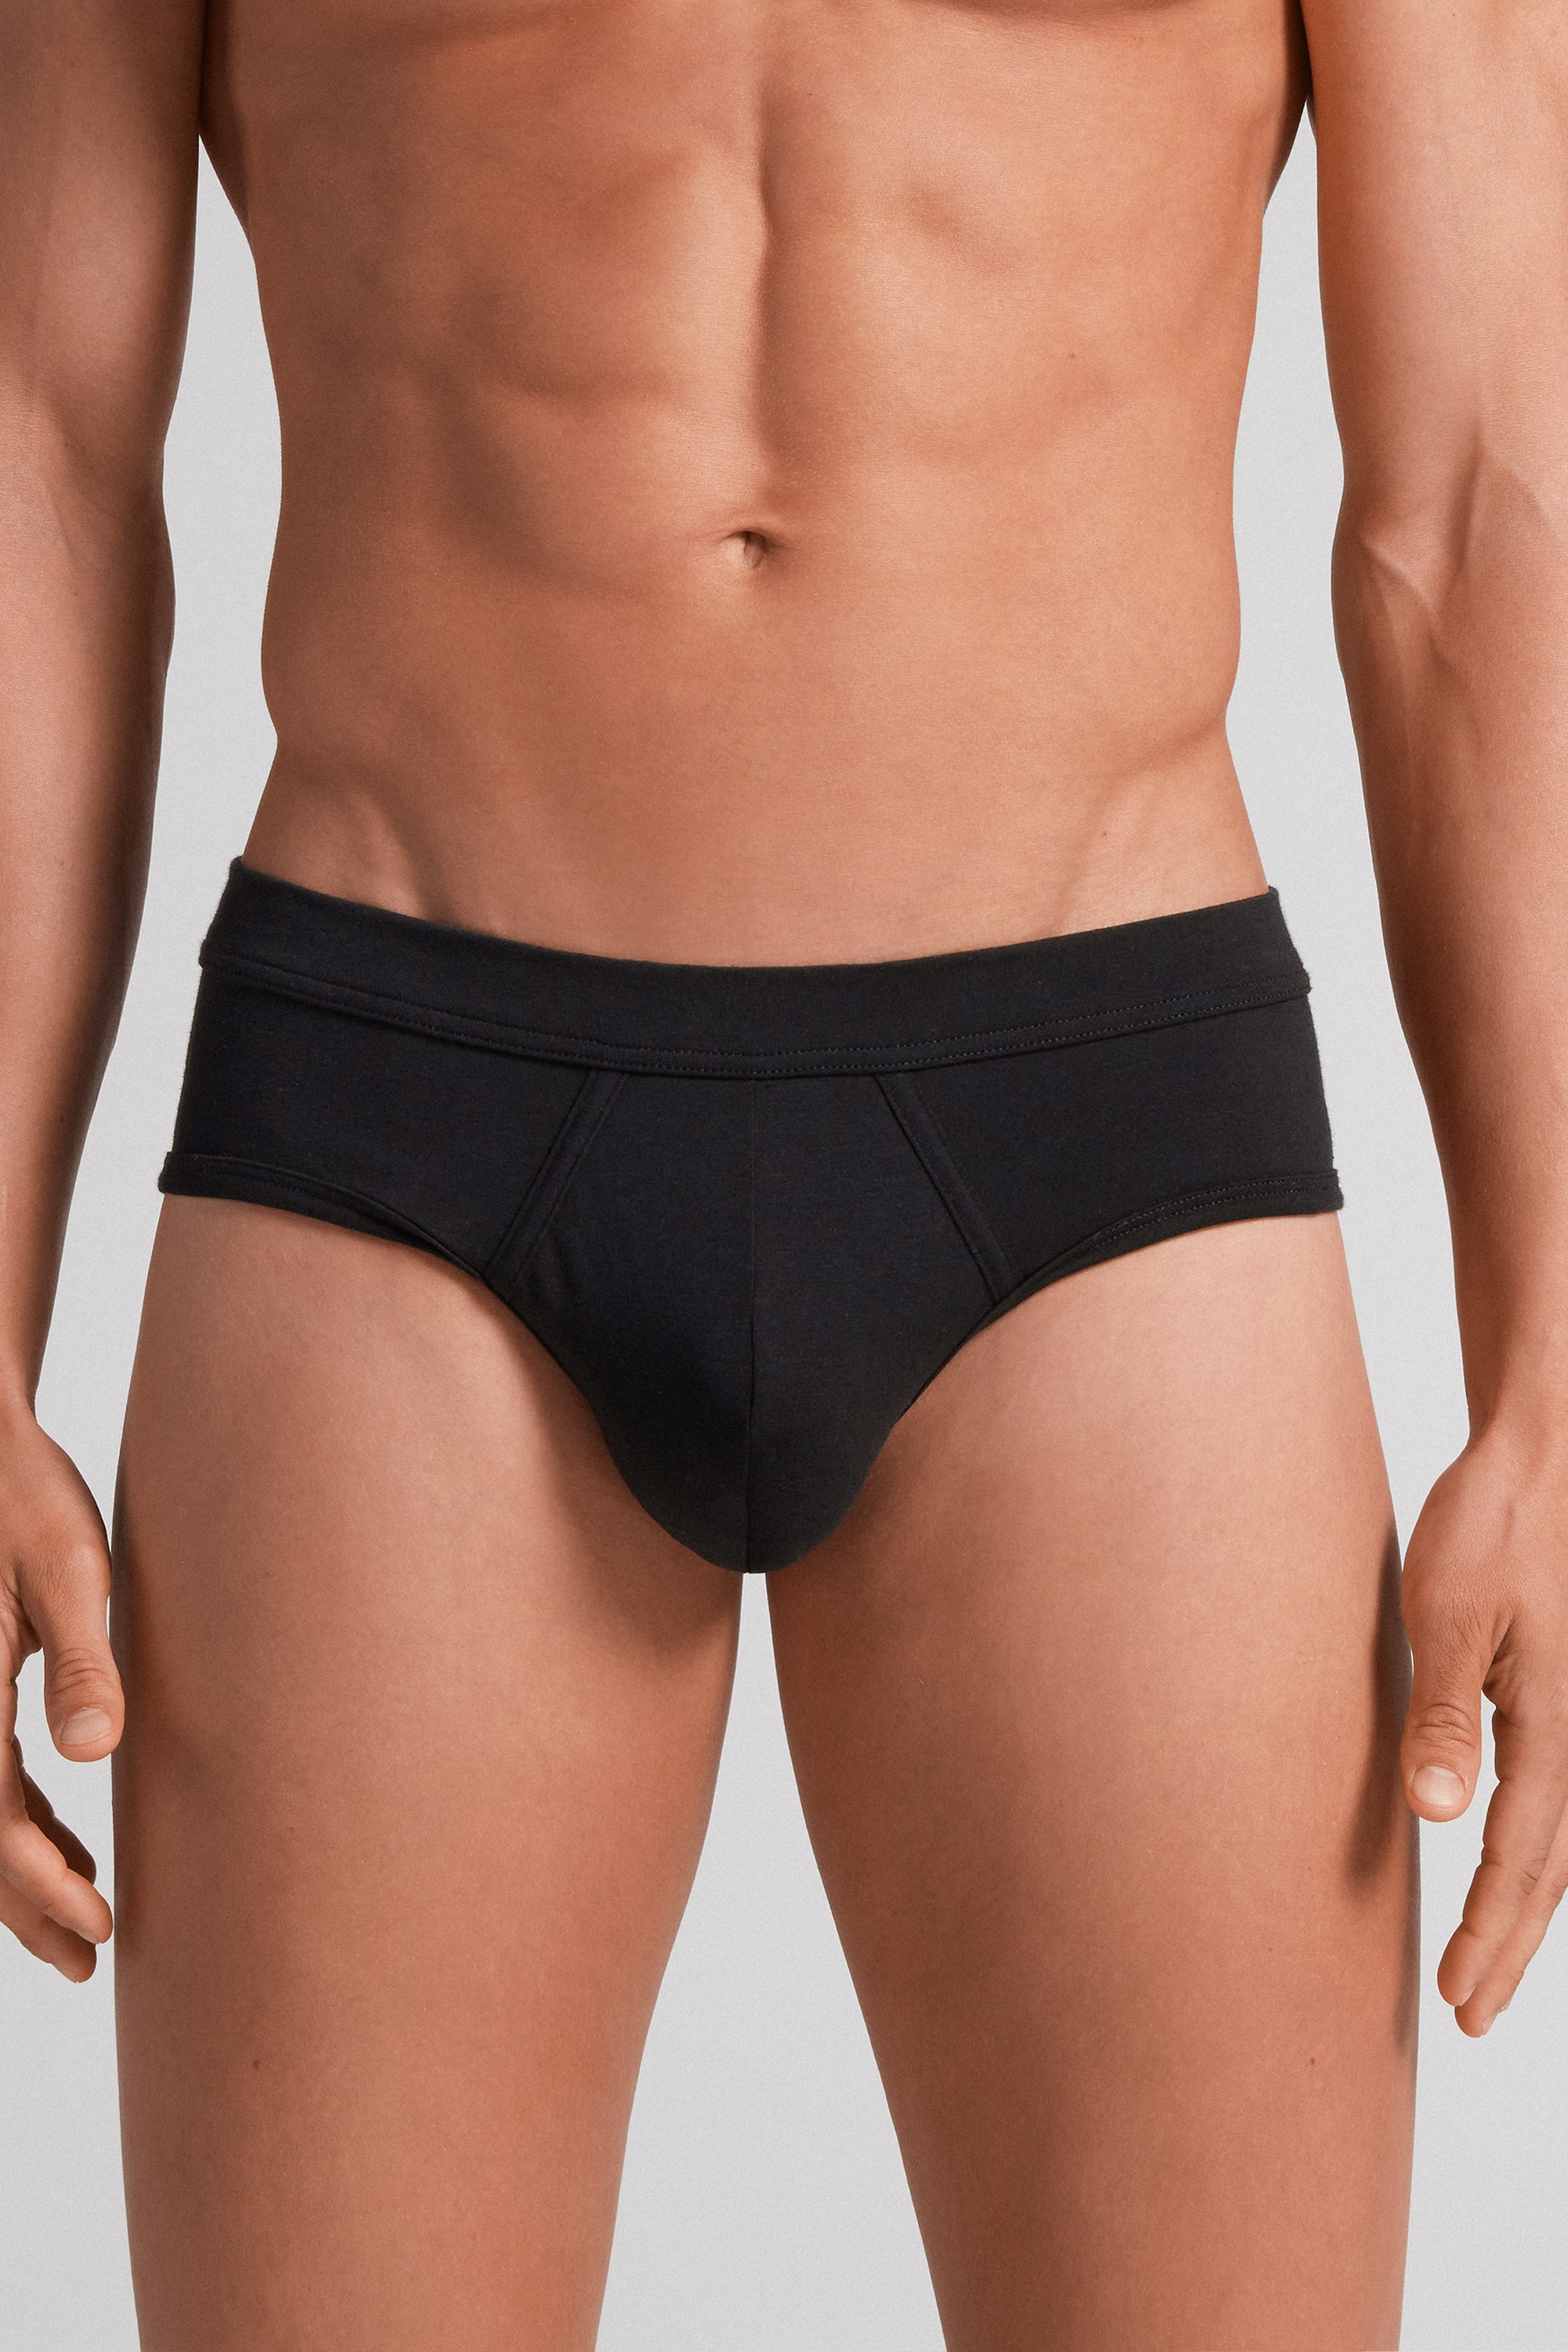 Intimissimi Uomo - Supima® cotton boxers collection. The premium quality  fabric is incredibly soft and breathable with great stretch. I SBU12C I  #intimissimiuomo #boxer #tshirt #supima #supimacotton